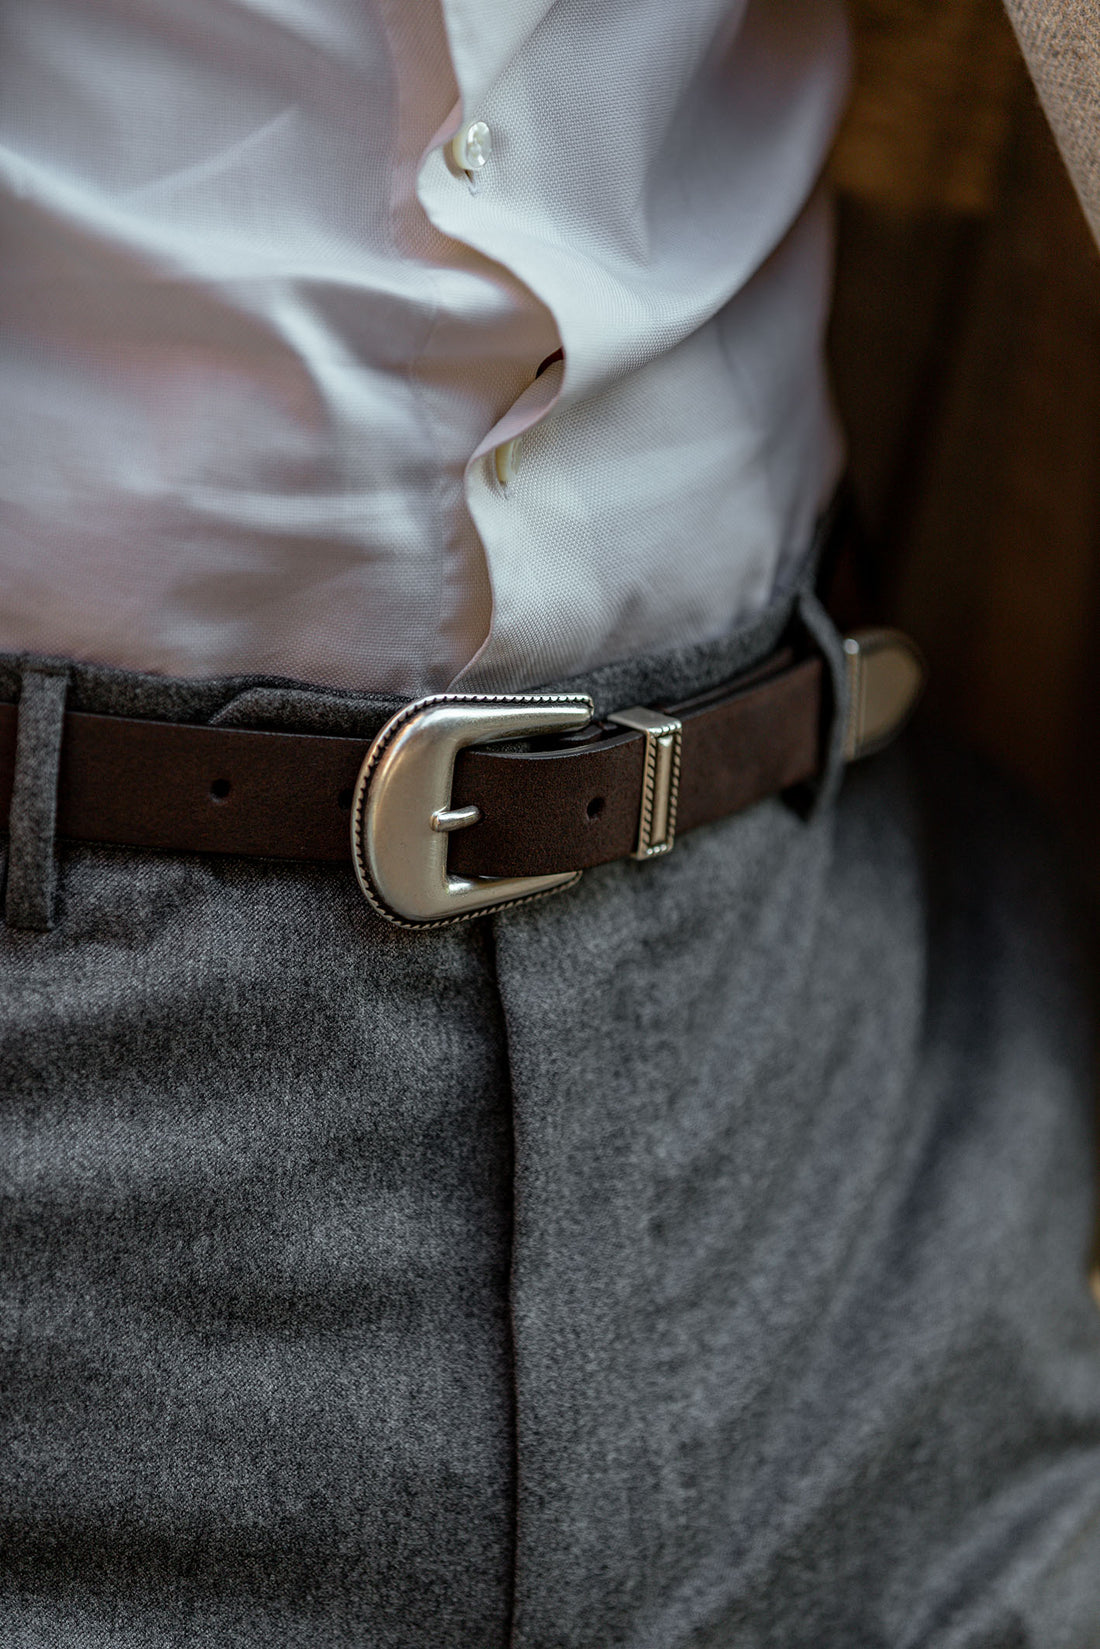 A close-up of a person wearing a white shirt tucked into gray trousers, secured with a brown leather belt.